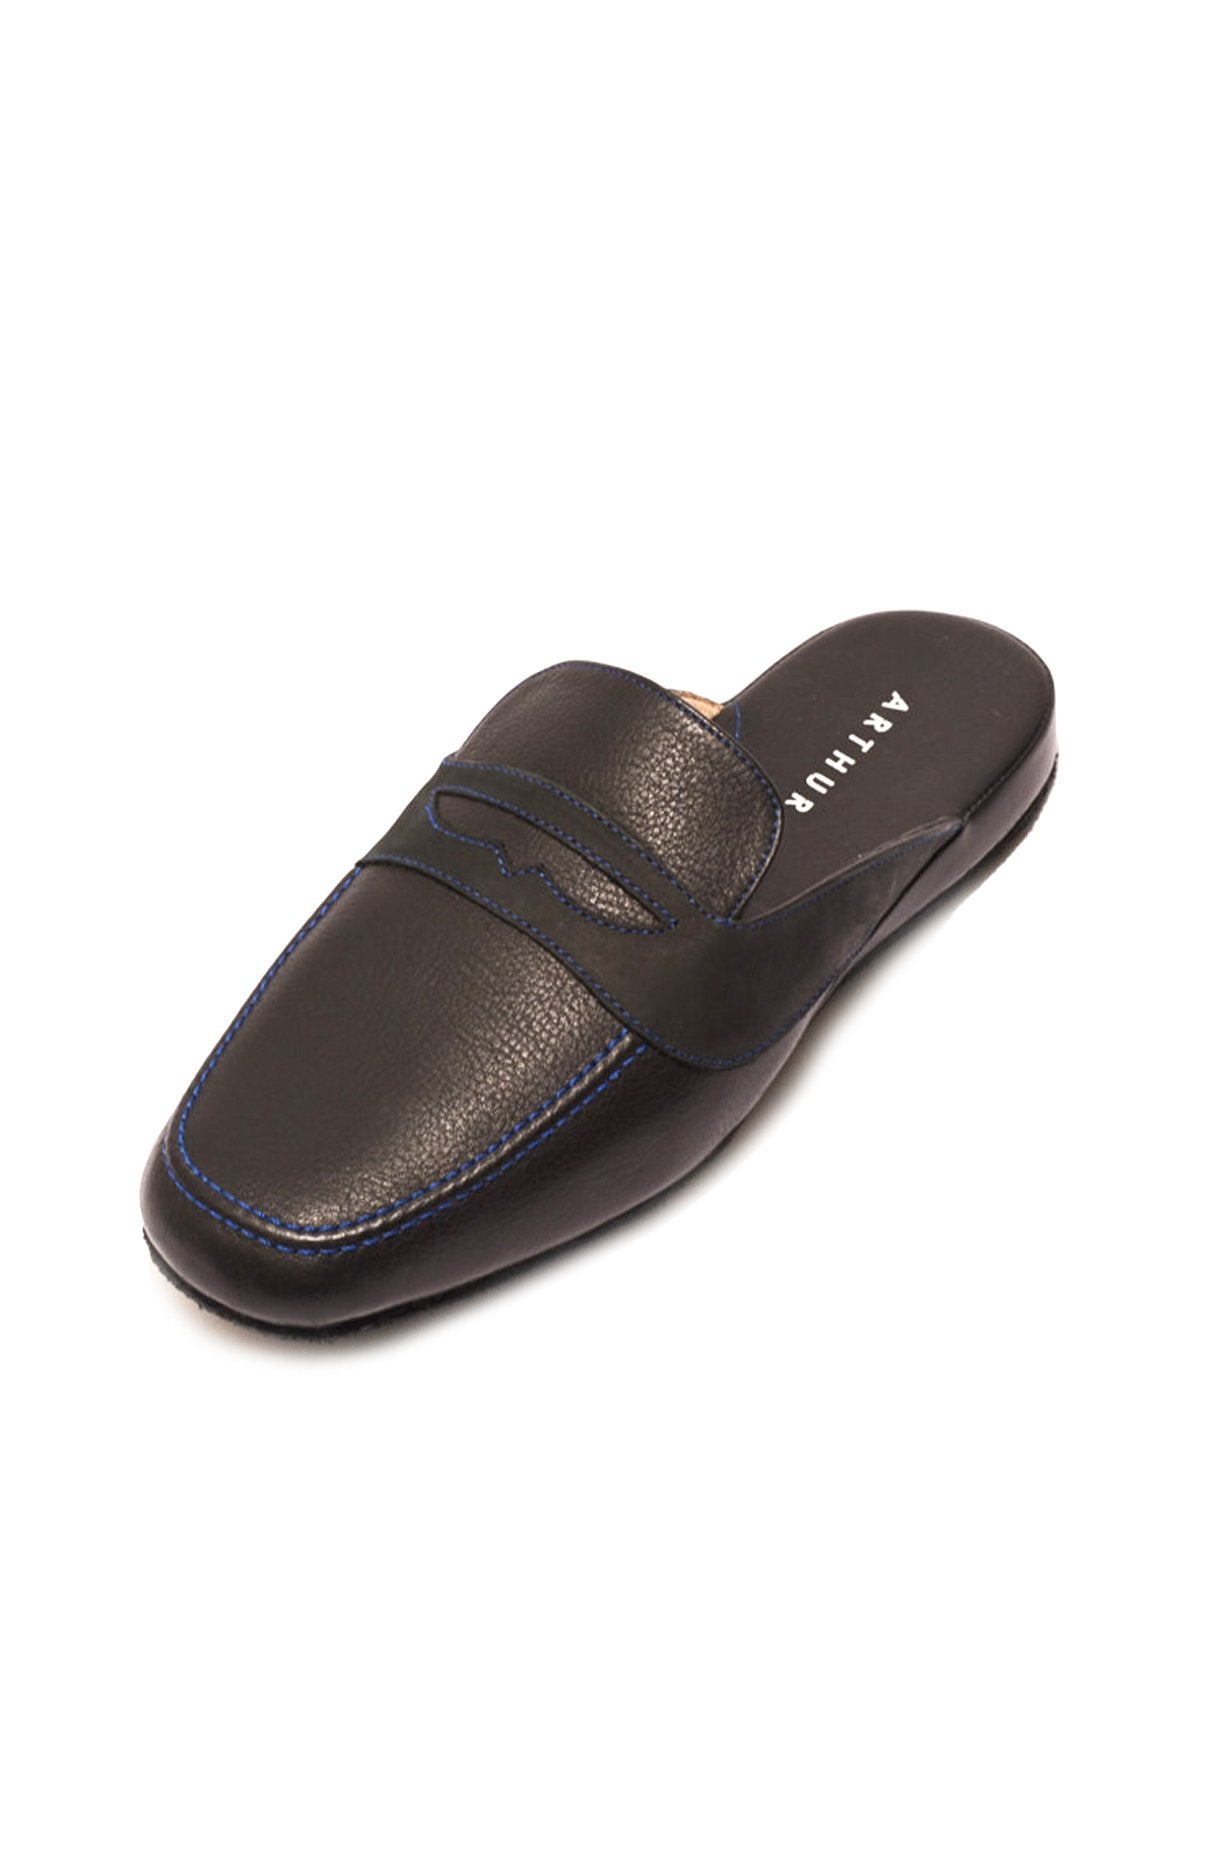 Leather Slippers - Traditional